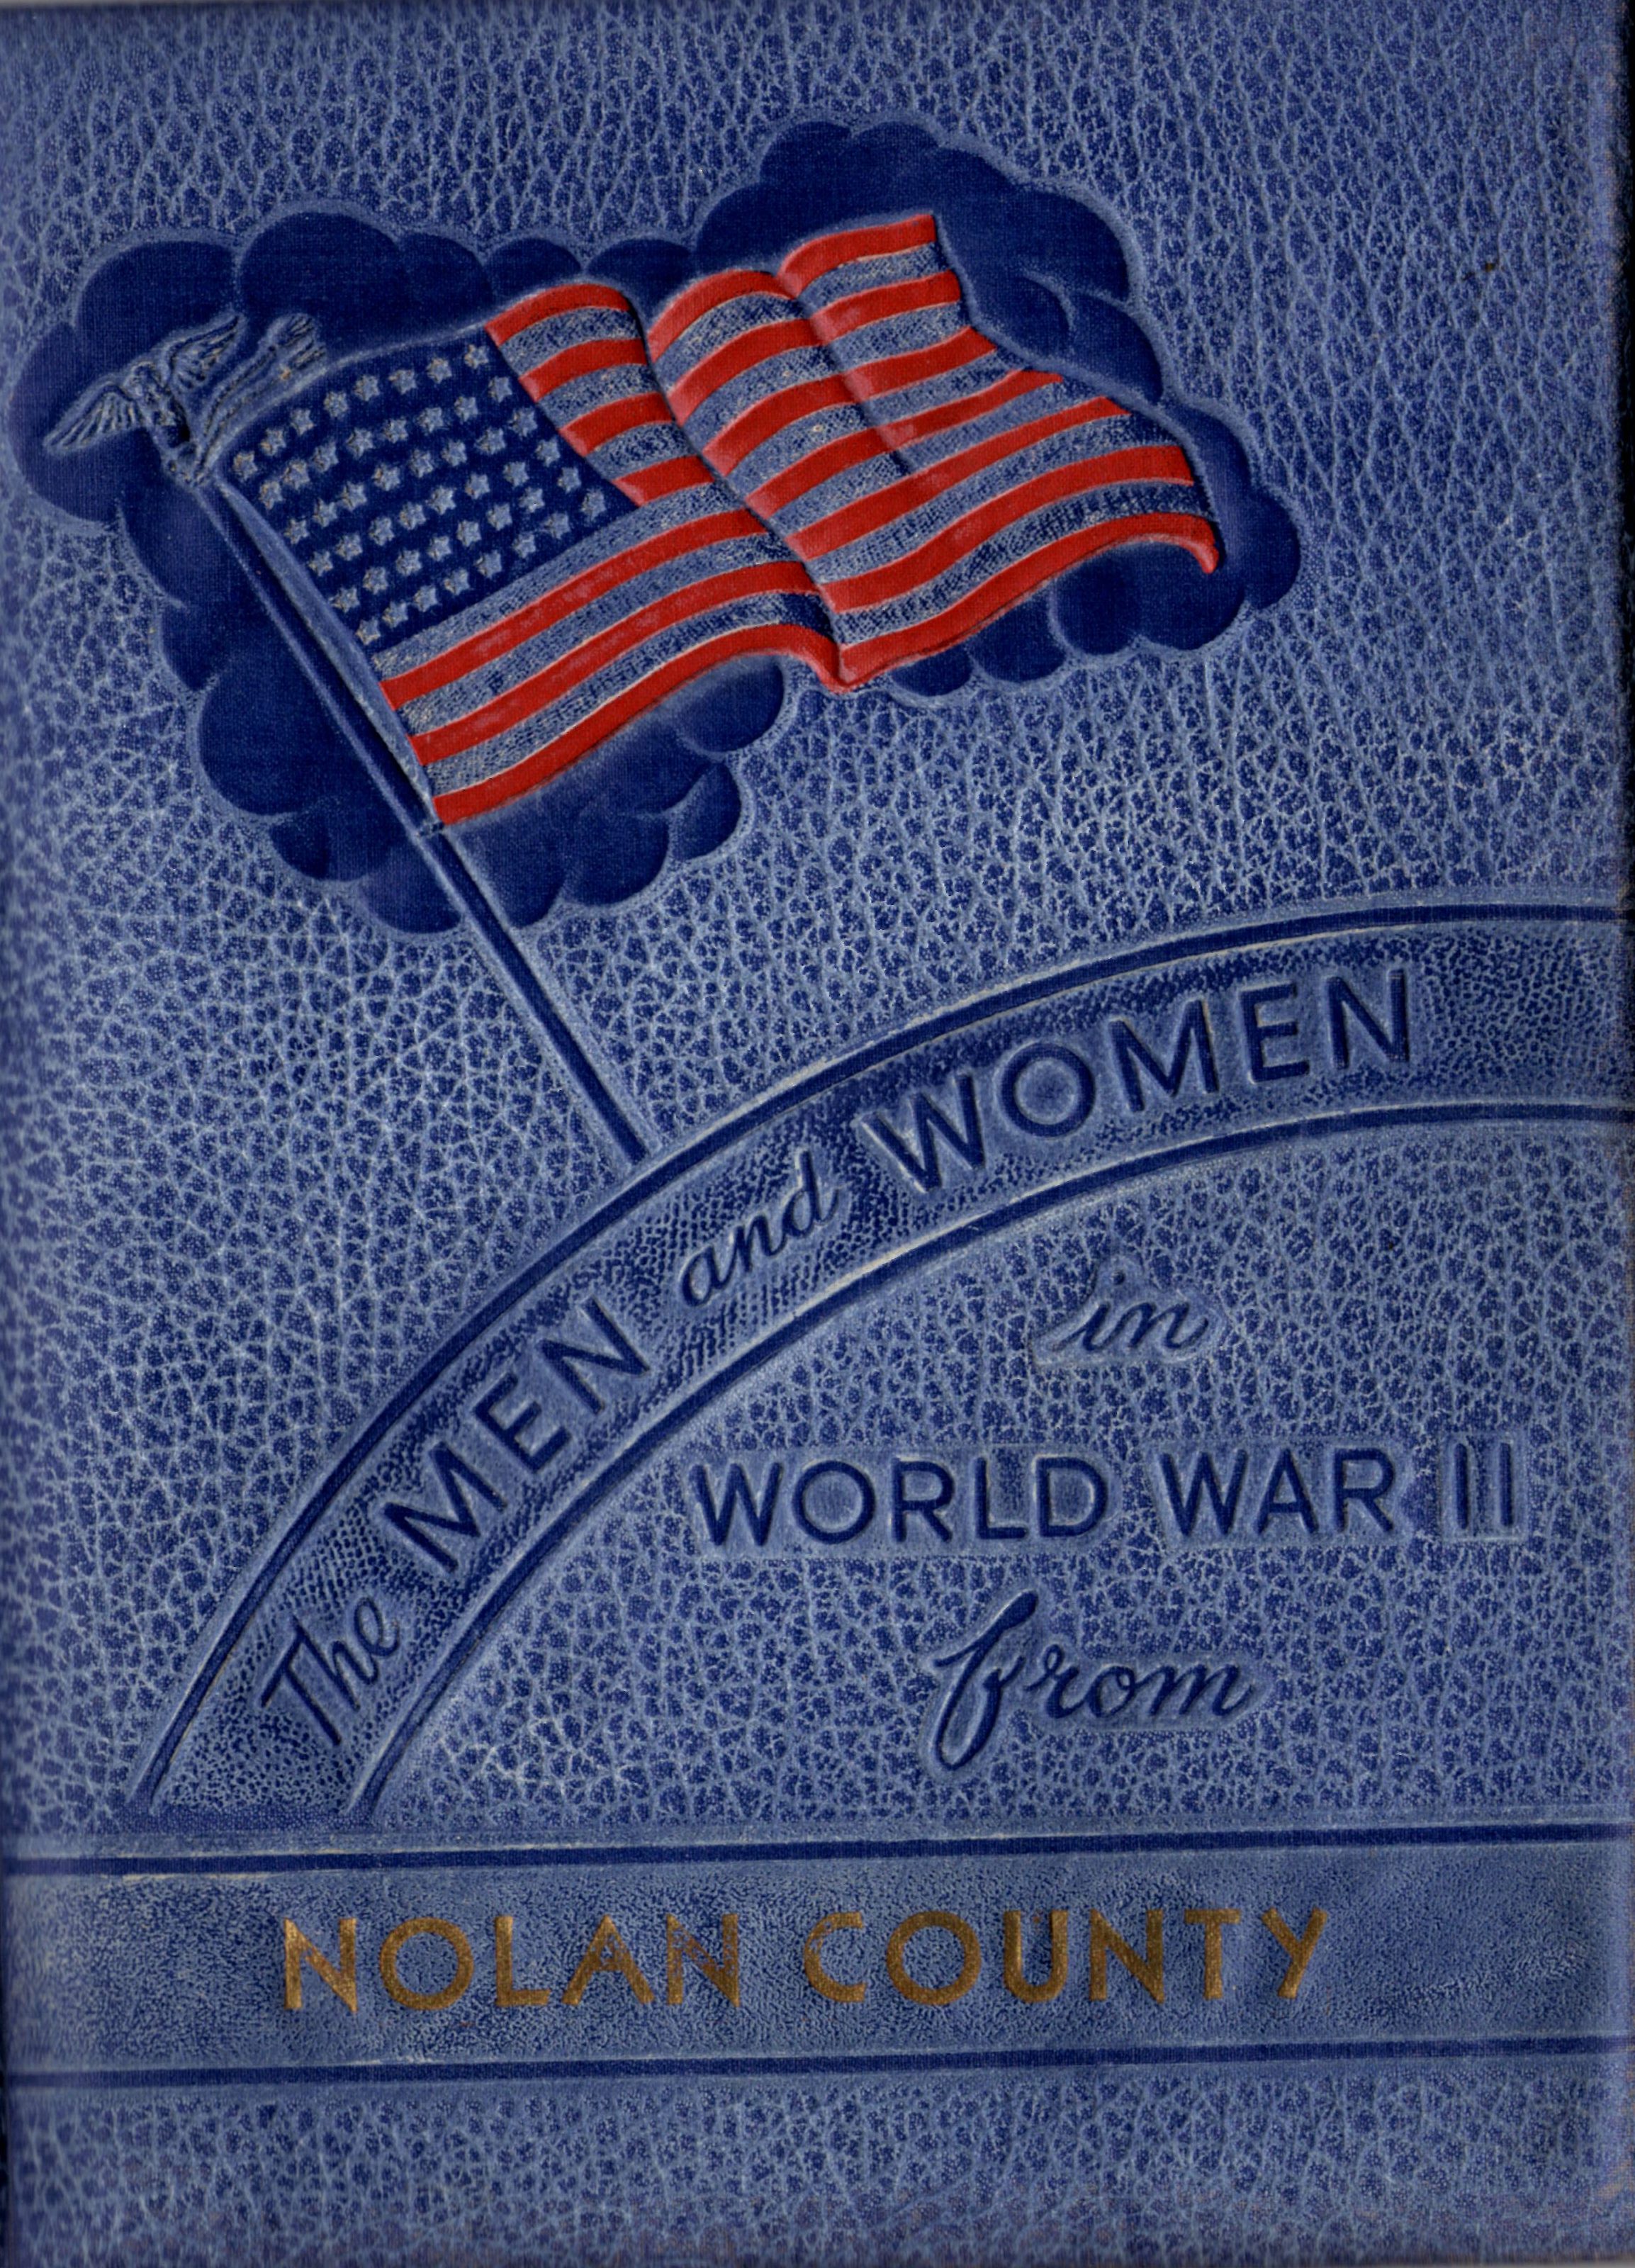 Men and women in the Armed Forces from Nolan County Texas World War II 2 !! Two11 WW2 WWII